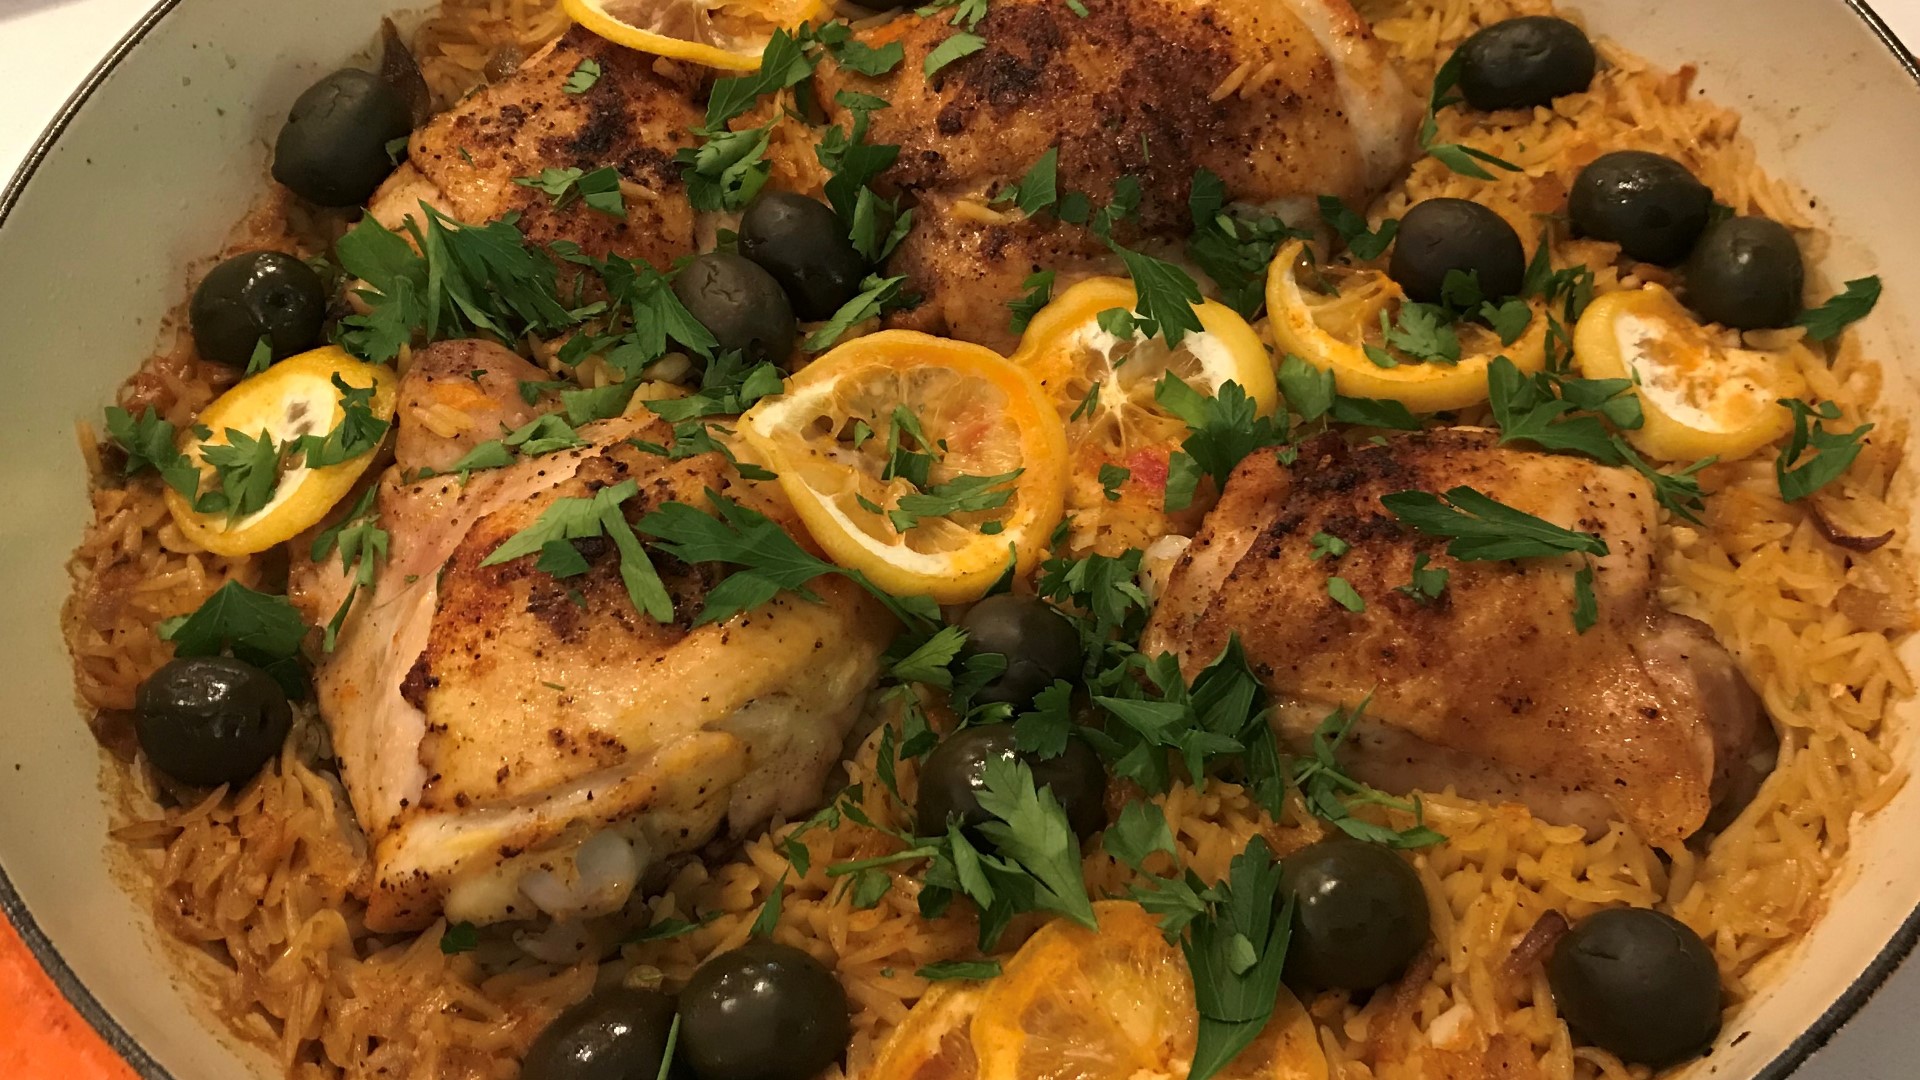 Kick off Mediterranean Diet Month with this recipe for Paprika Chicken with Olives & Orzo from popular food blog The Little Ferrraro Kitchen. #newdaynw